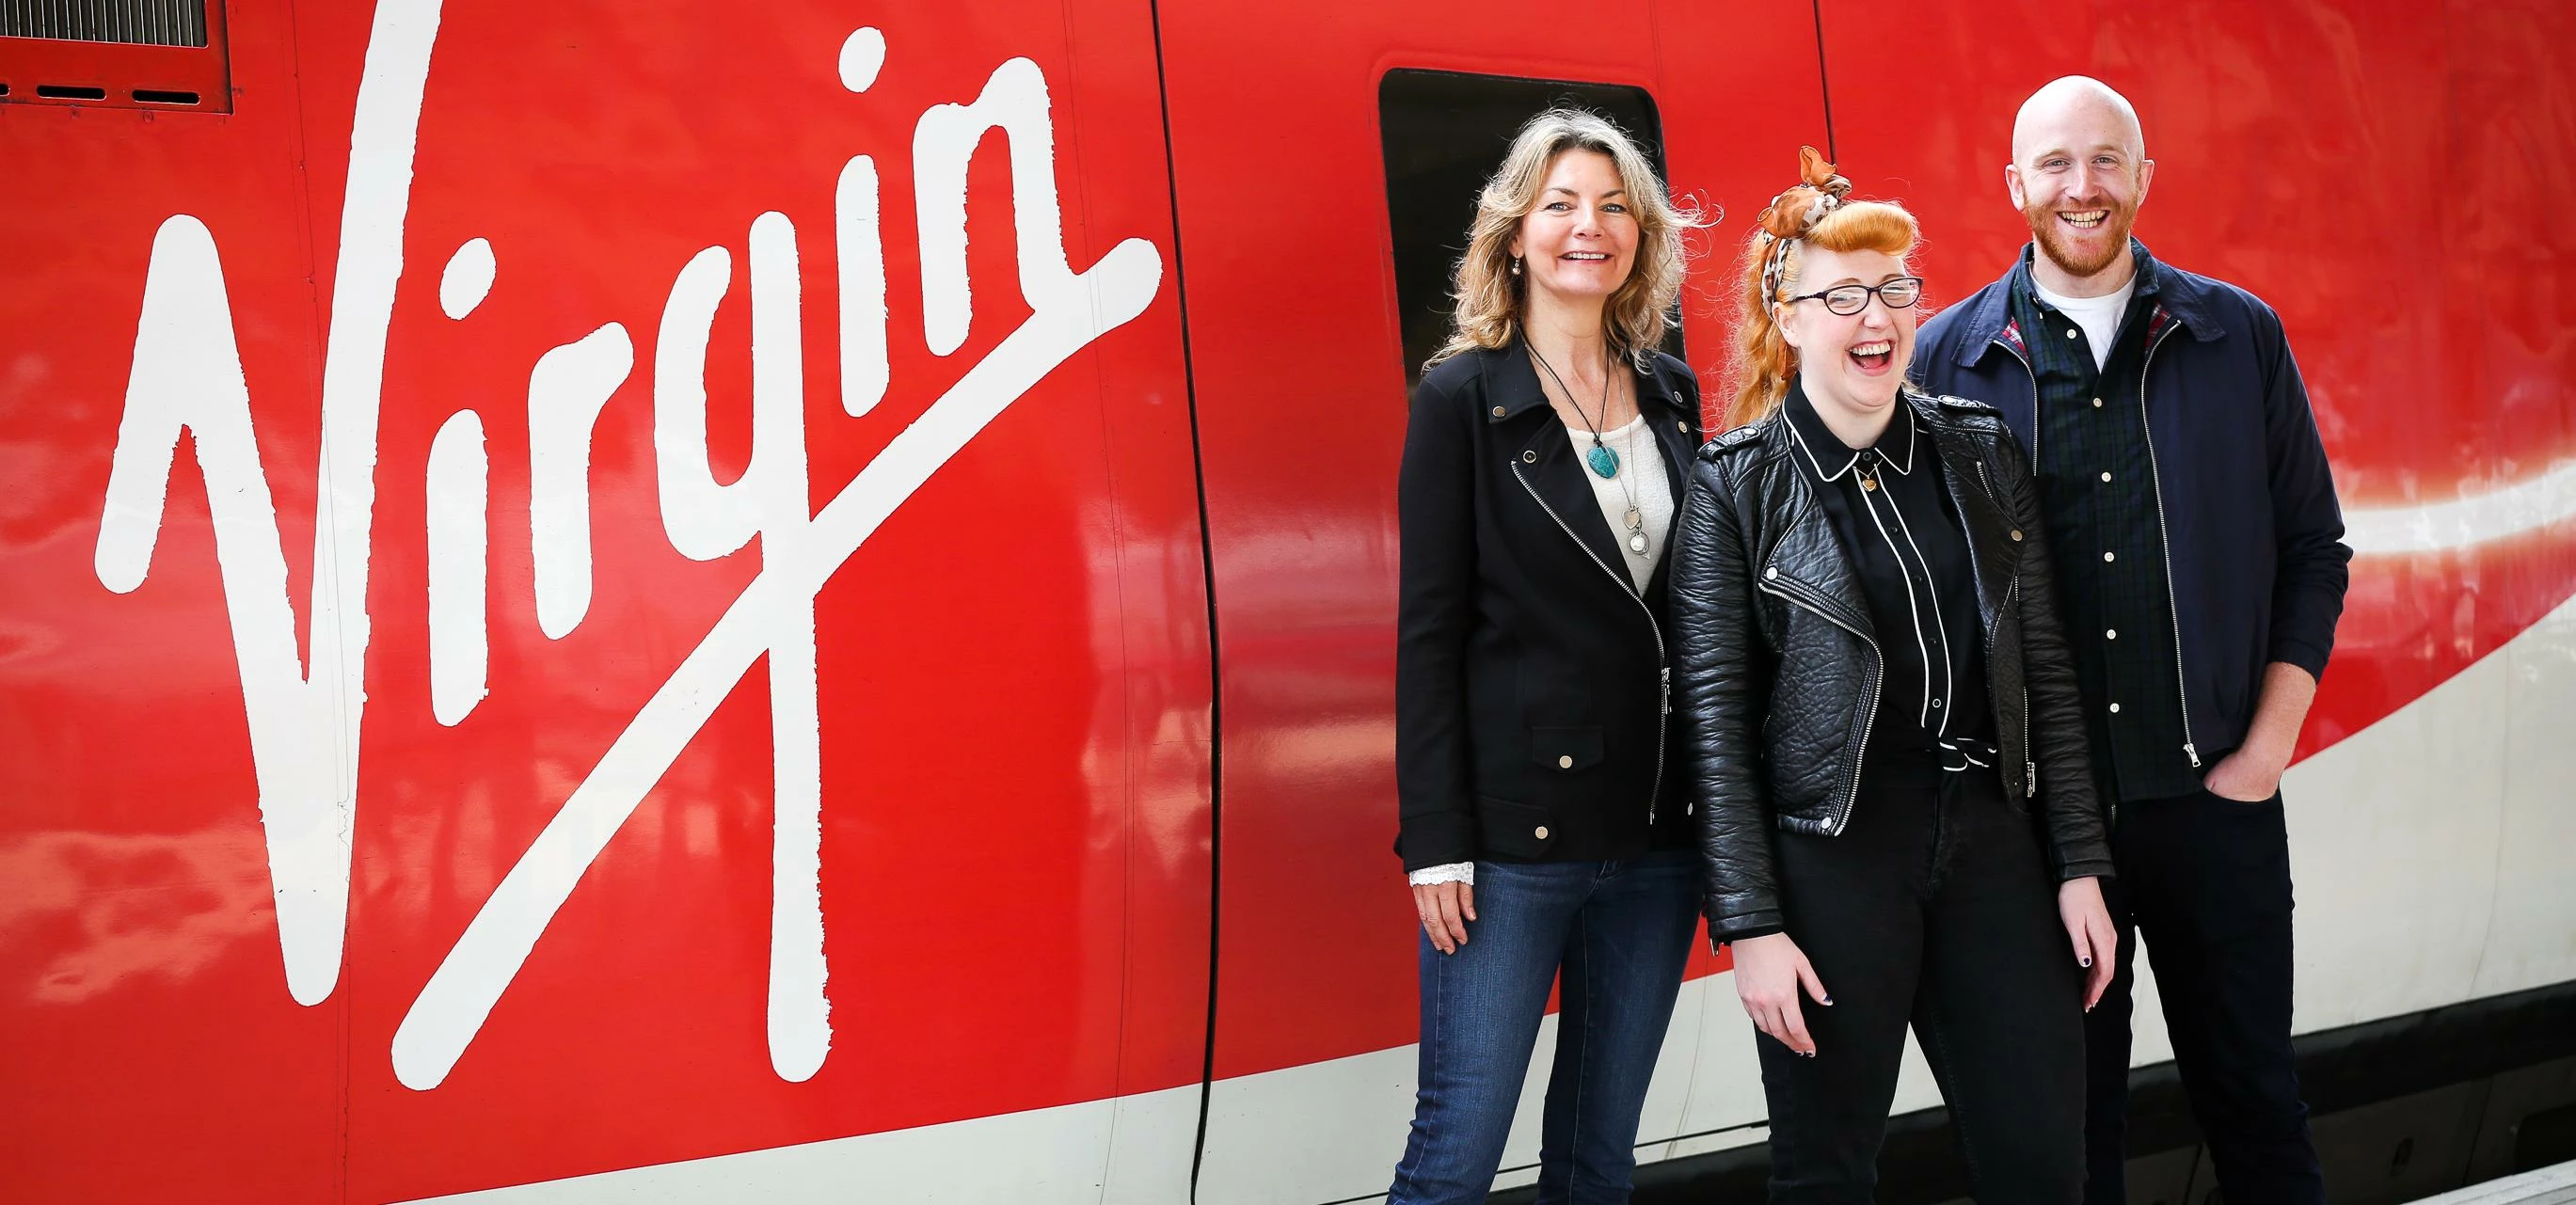 Virgin Trains brings cheer as Brits forget how to laugh